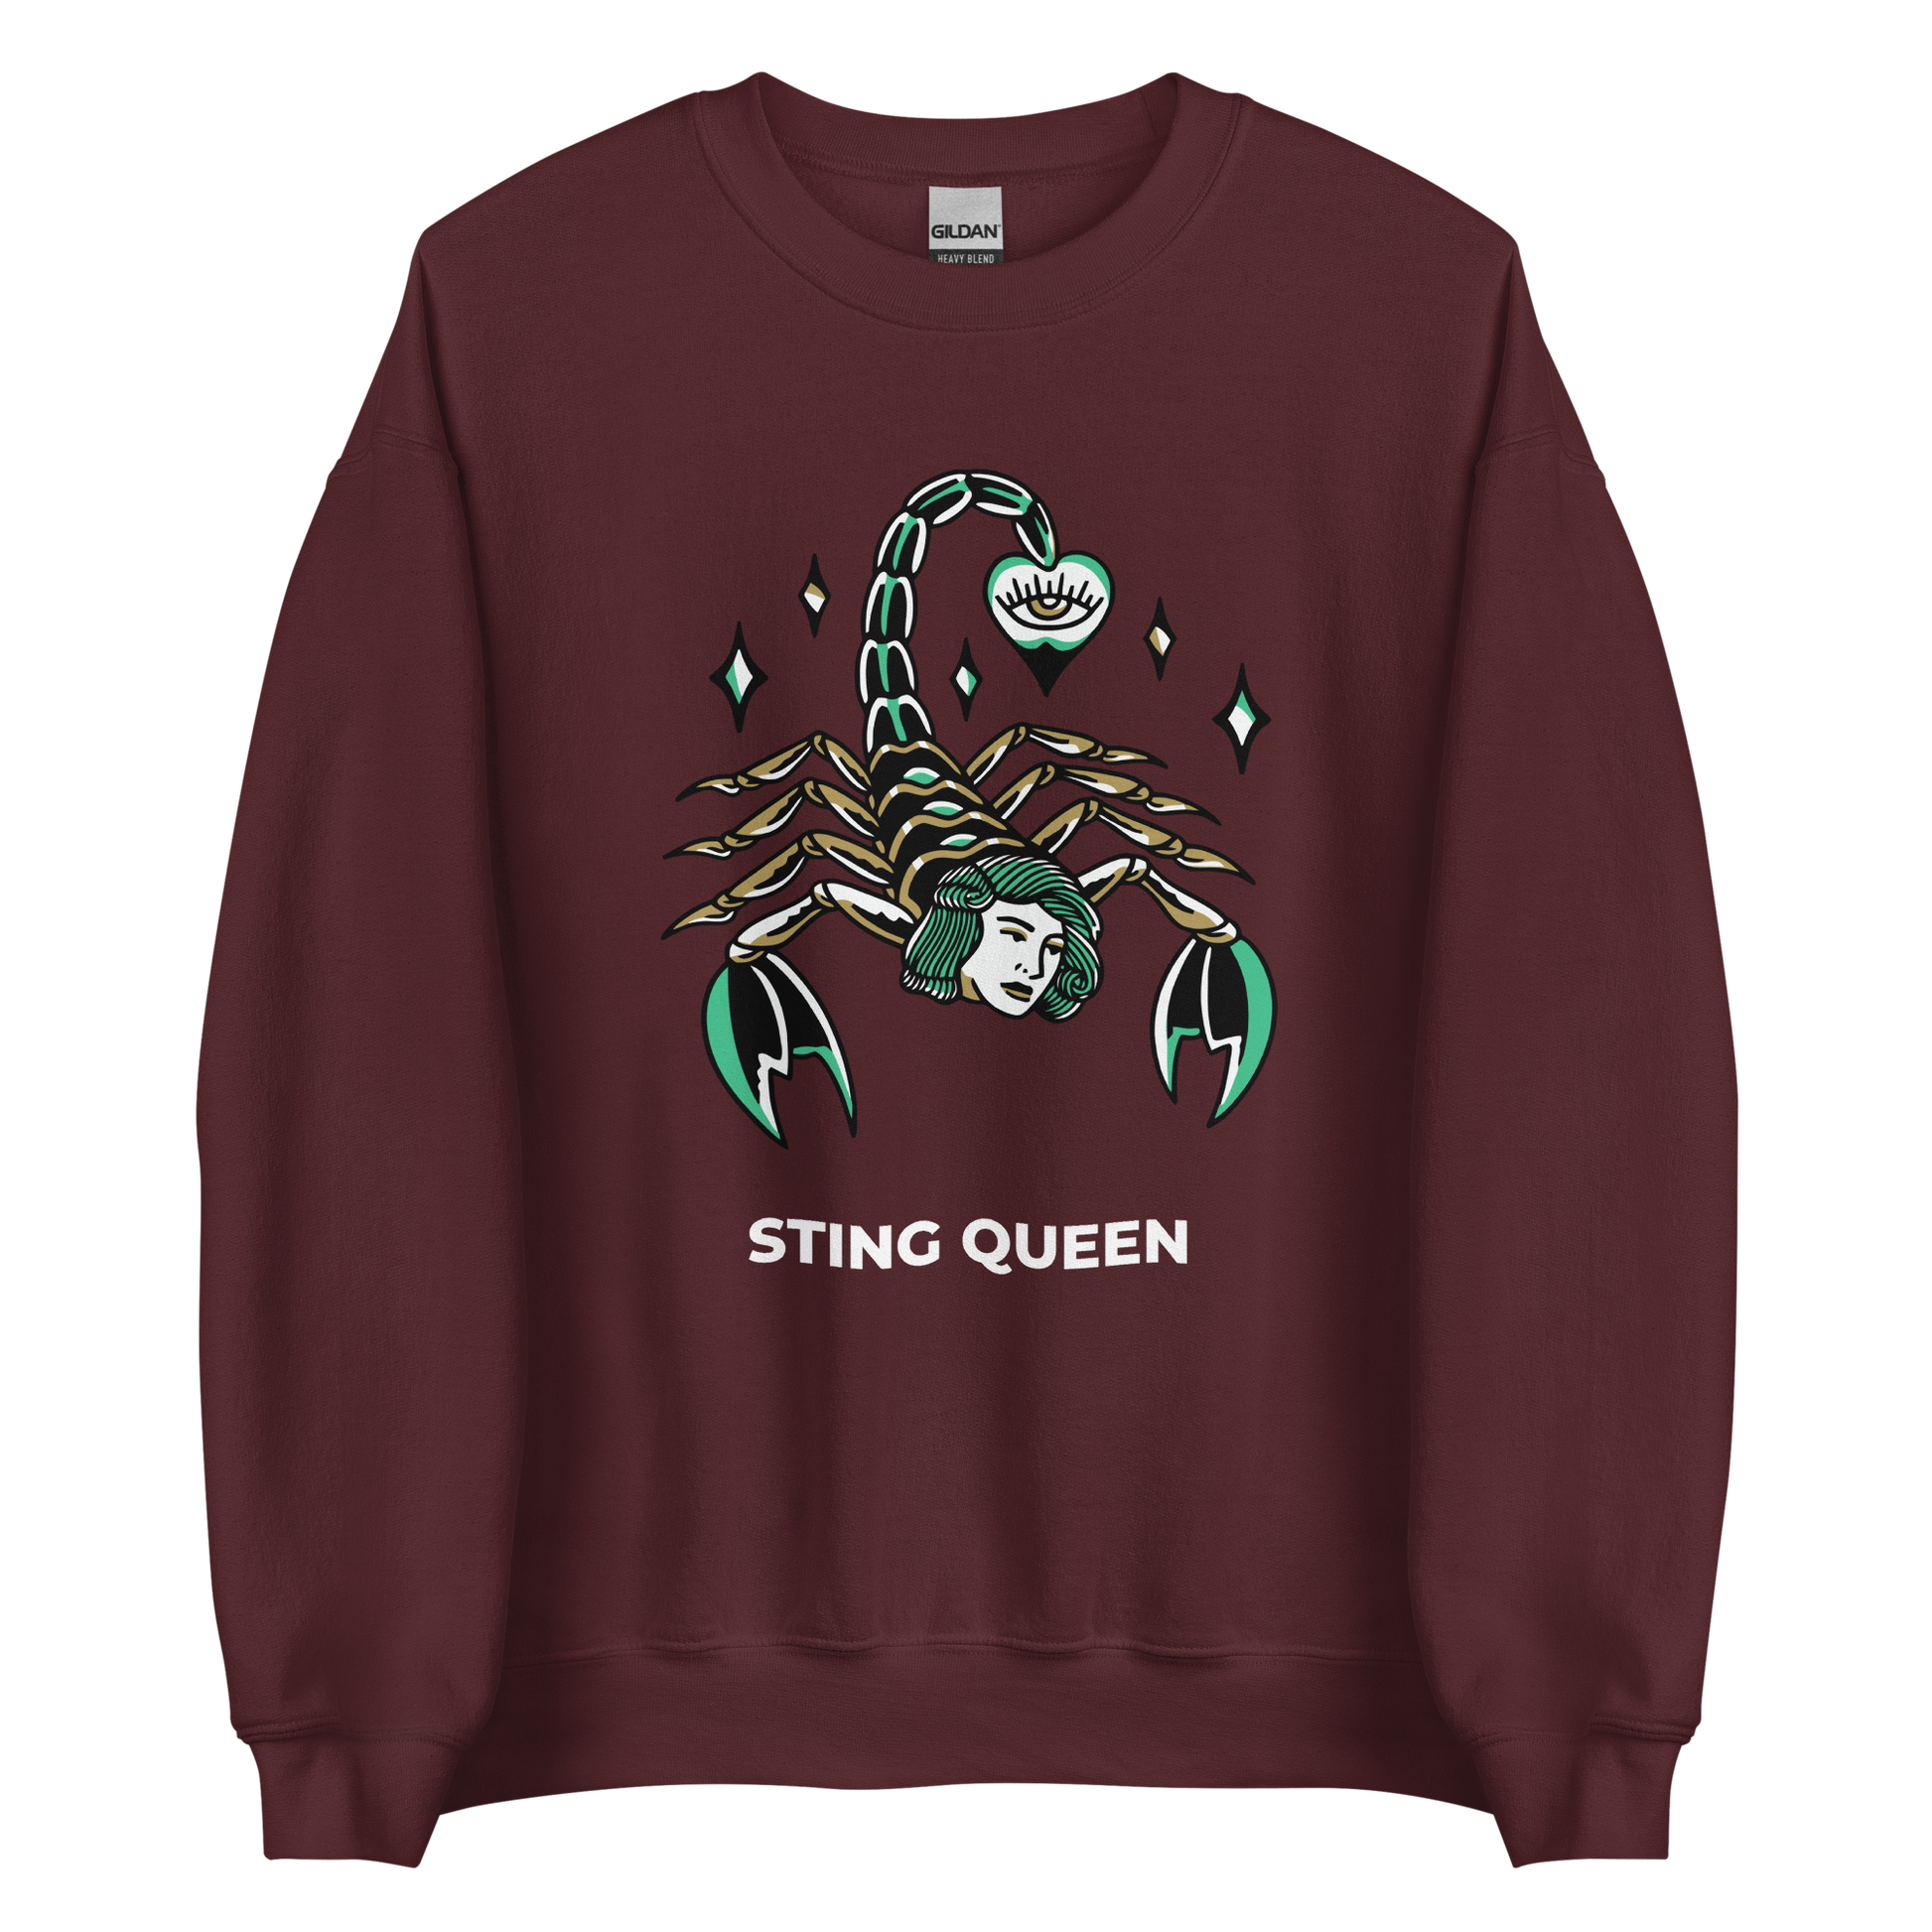 Maroon Scorpion Sweatshirt featuring the Sting Queen graphic on the chest - Cool Graphic Scorpion Sweatshirts - Boozy Fox